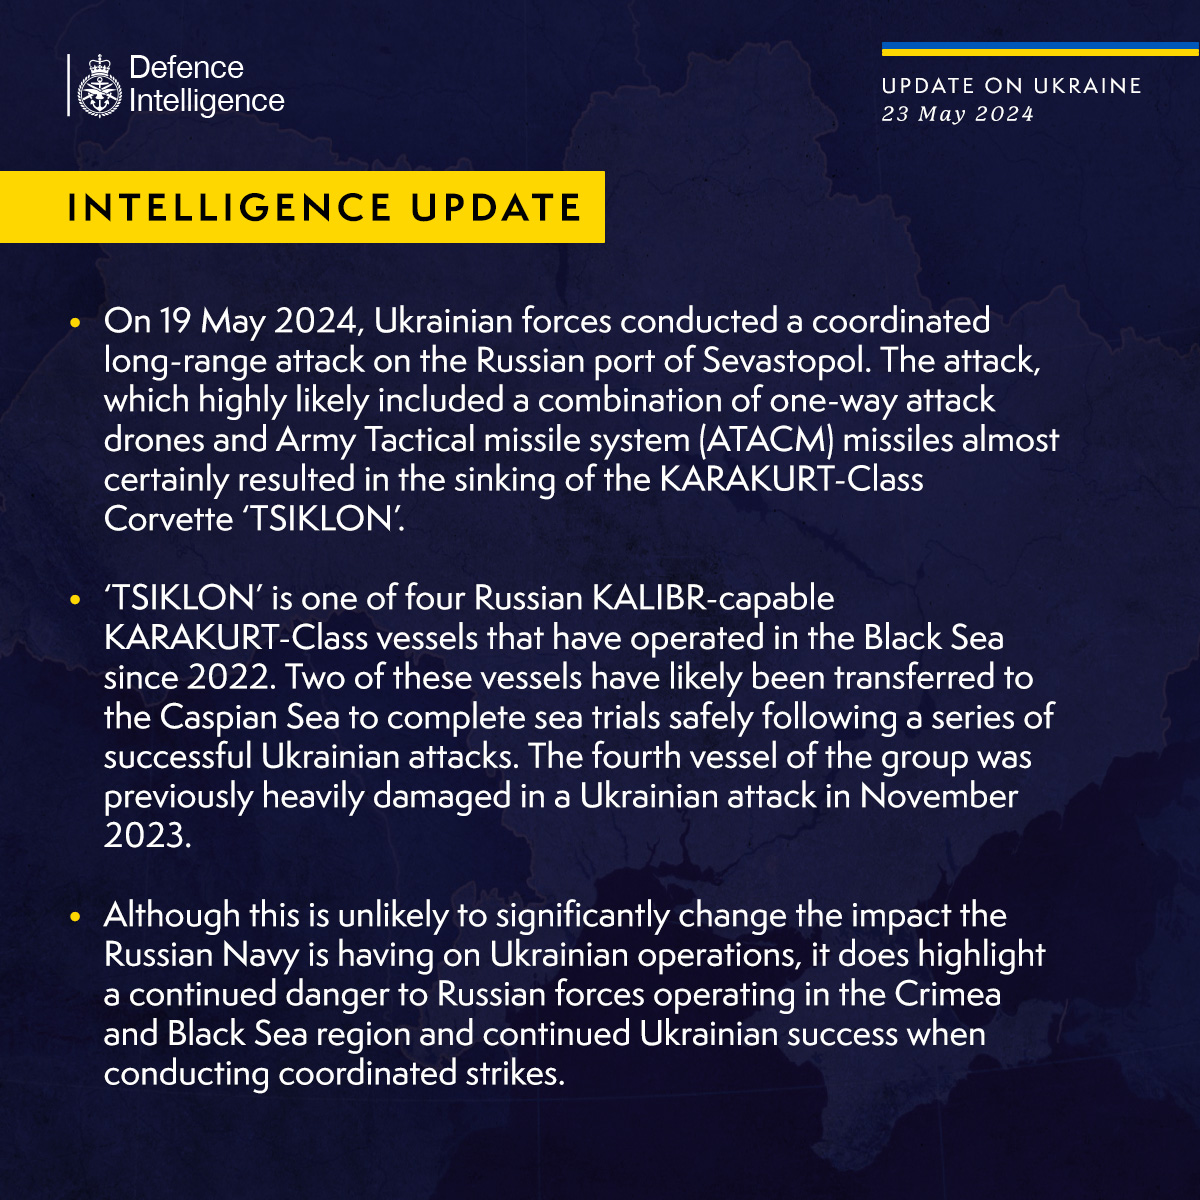 Latest Defence Intelligence update on the situation in Ukraine – 23 May 2024. Find out more about Defence Intelligence's use of language: ow.ly/7p2A50RMoAQ #StandWithUkraine 🇺🇦